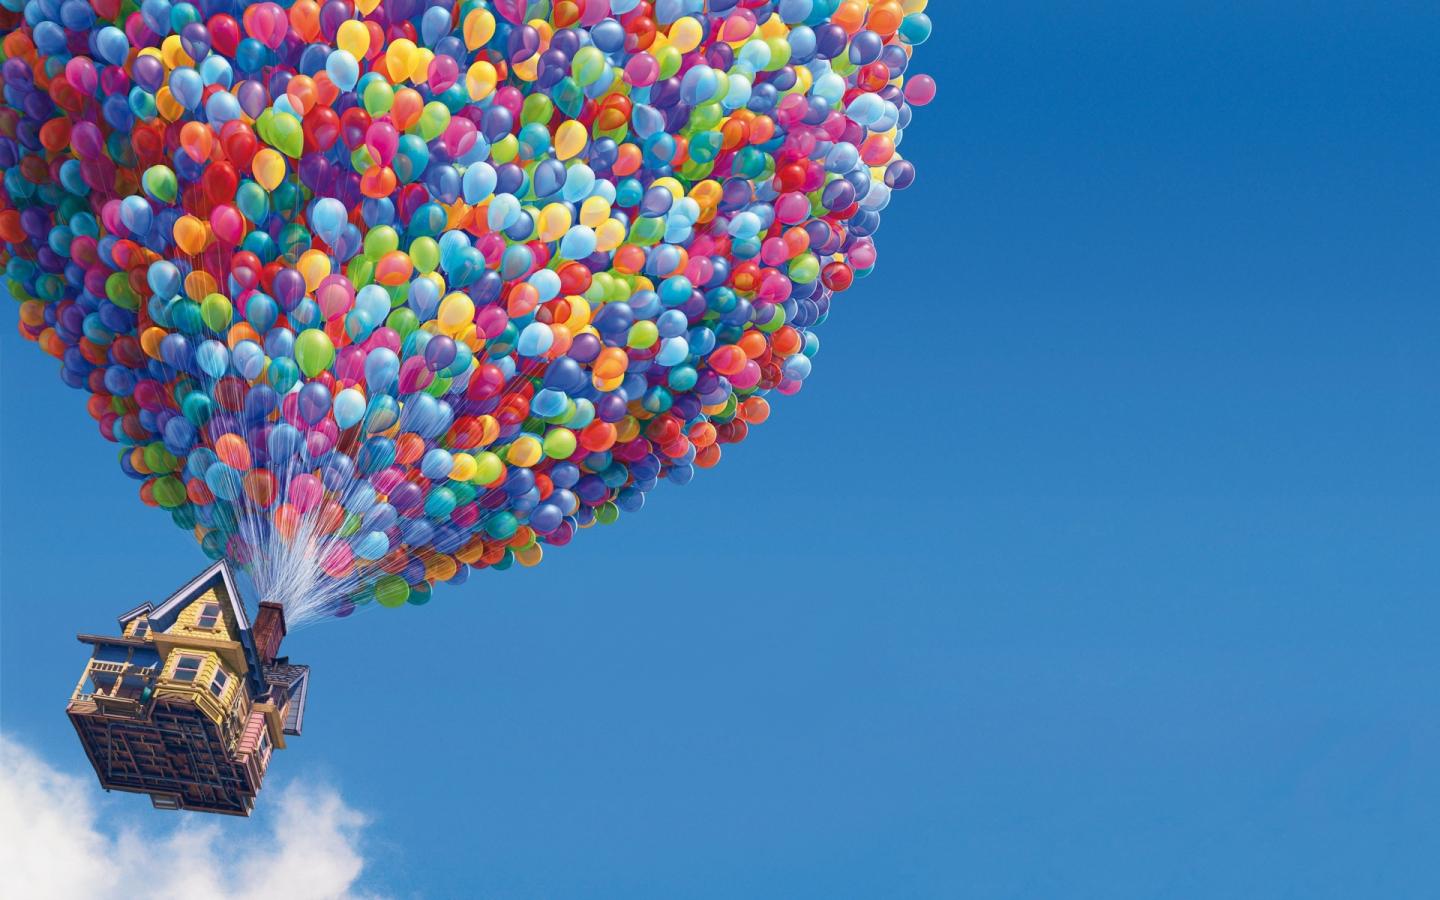 Up Pixar Animation HD Wallpapers Download Wallpapers in HD 1440x900